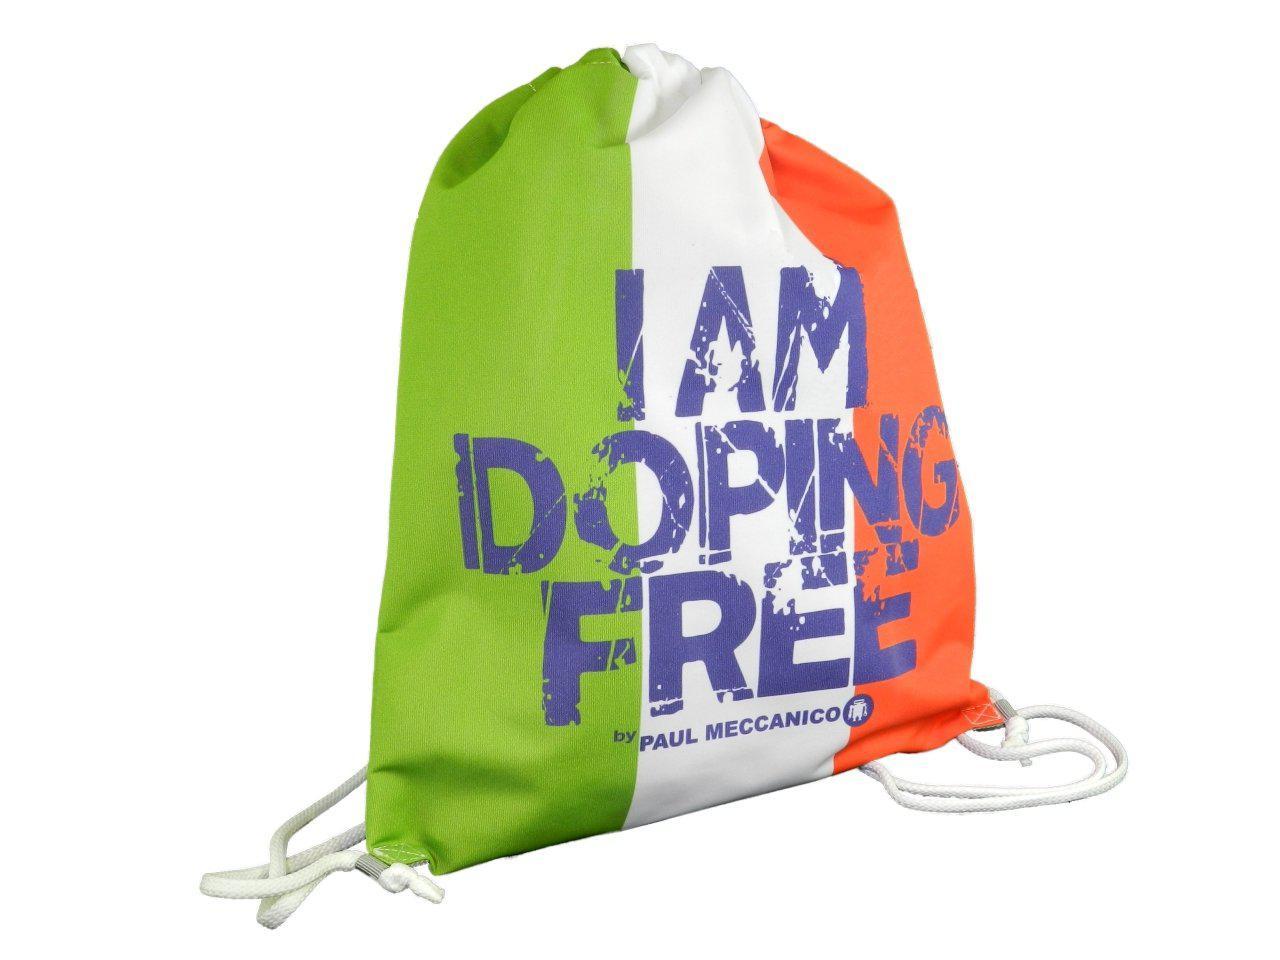 BACK SACK I AM DOPING FREE BY PAUL MECCANICO WITH ITALIAN FLAG. - Limited Edition Paul Meccanico